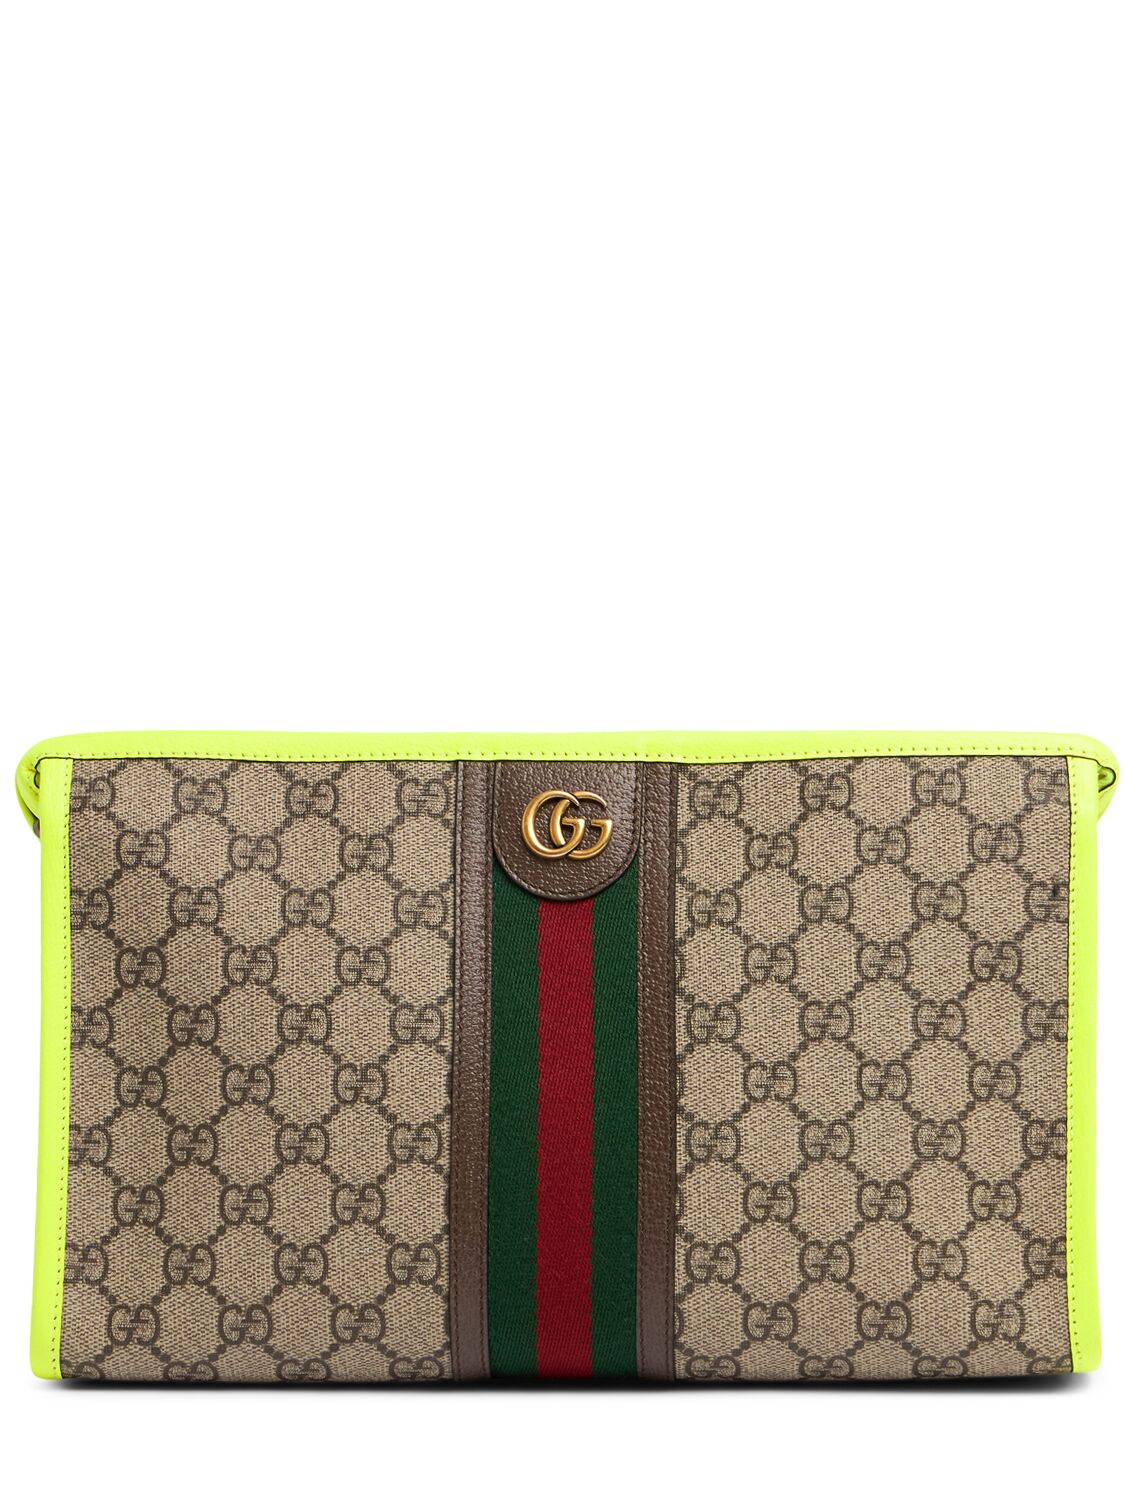 Gucci Ophidia Gg Pouch In Beige,yellow